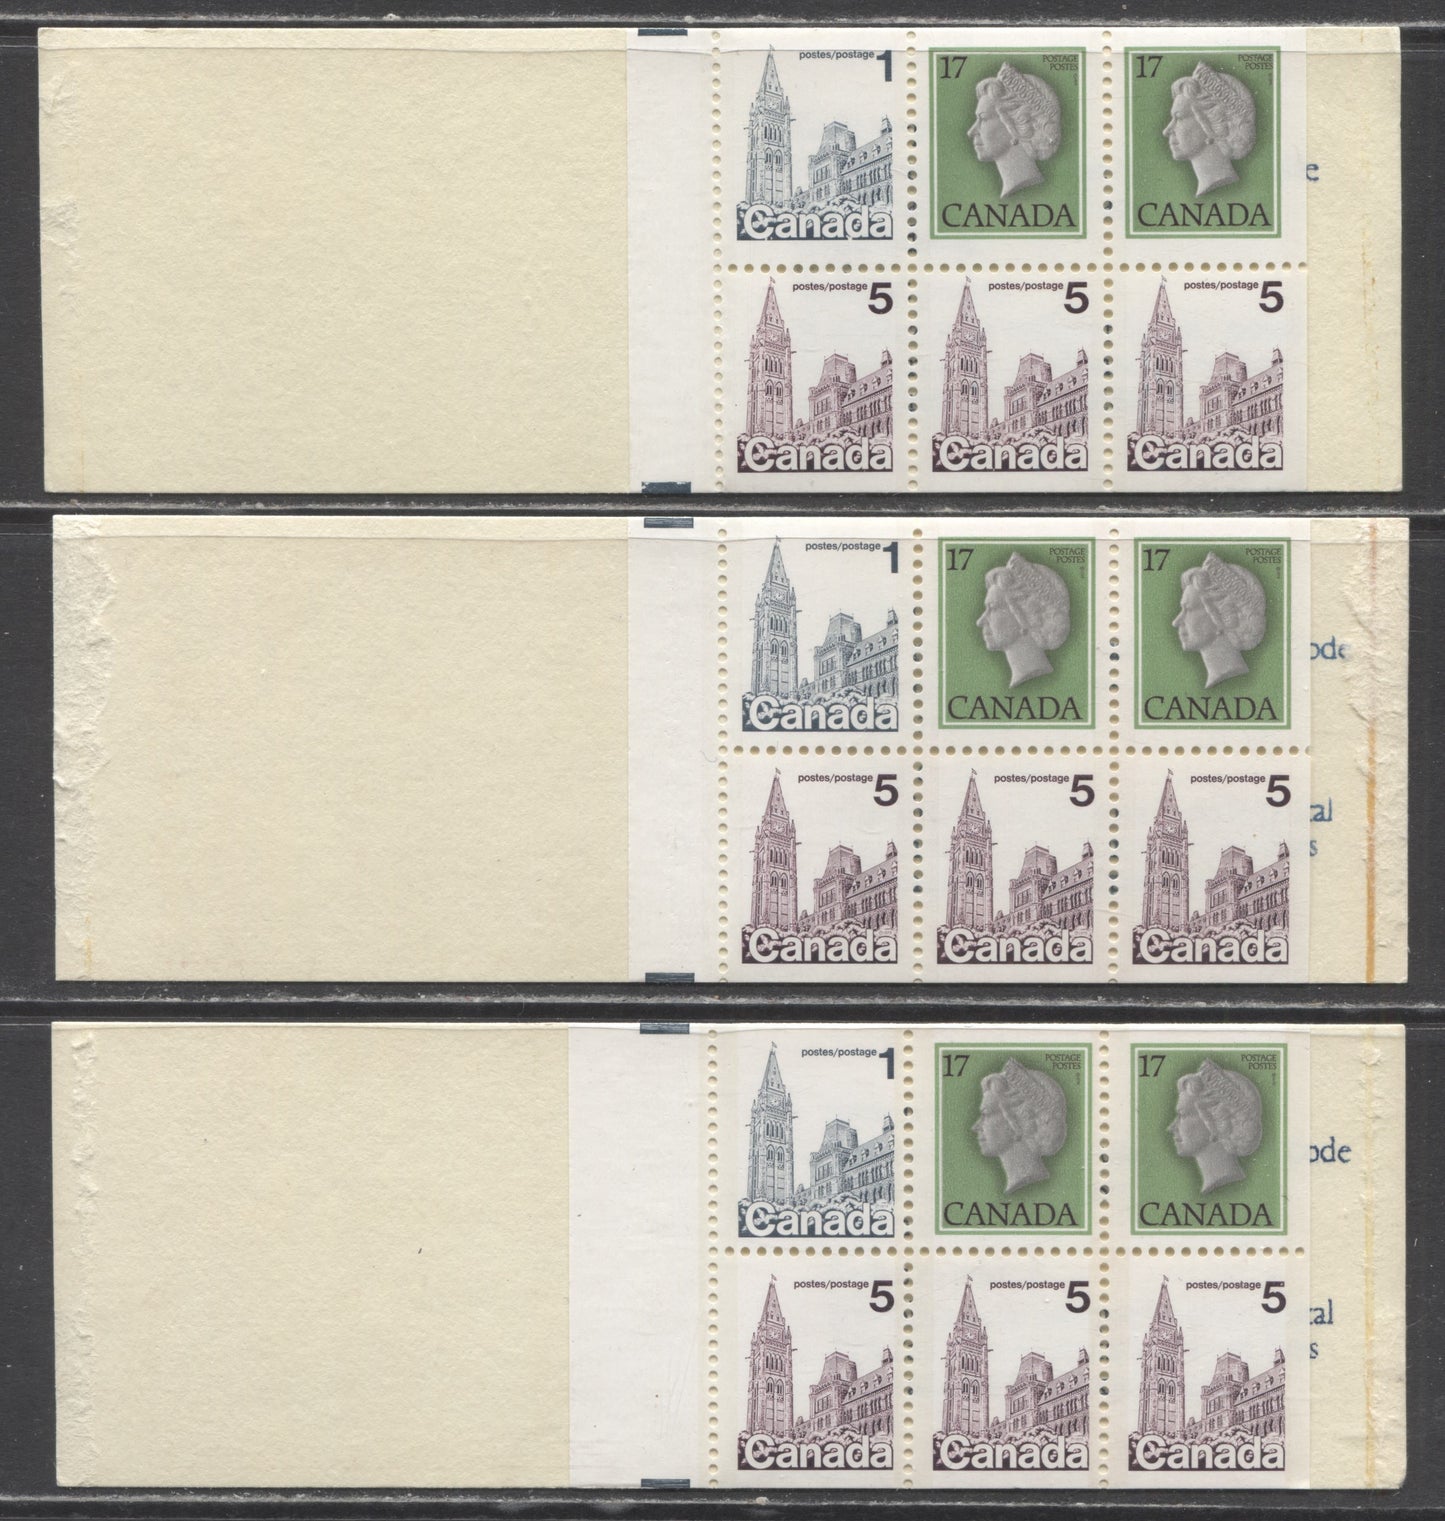 Lot 73 Canada #BK80h 17c Queen Elizabeth II, 1c & 5c Parliament, 1977-1982 Floral Issue, 3 VFNH Complete Counter Booklets With 70-77 mm Panes, DF/LF-fl Paper, 4.5 mm Wide Tagging